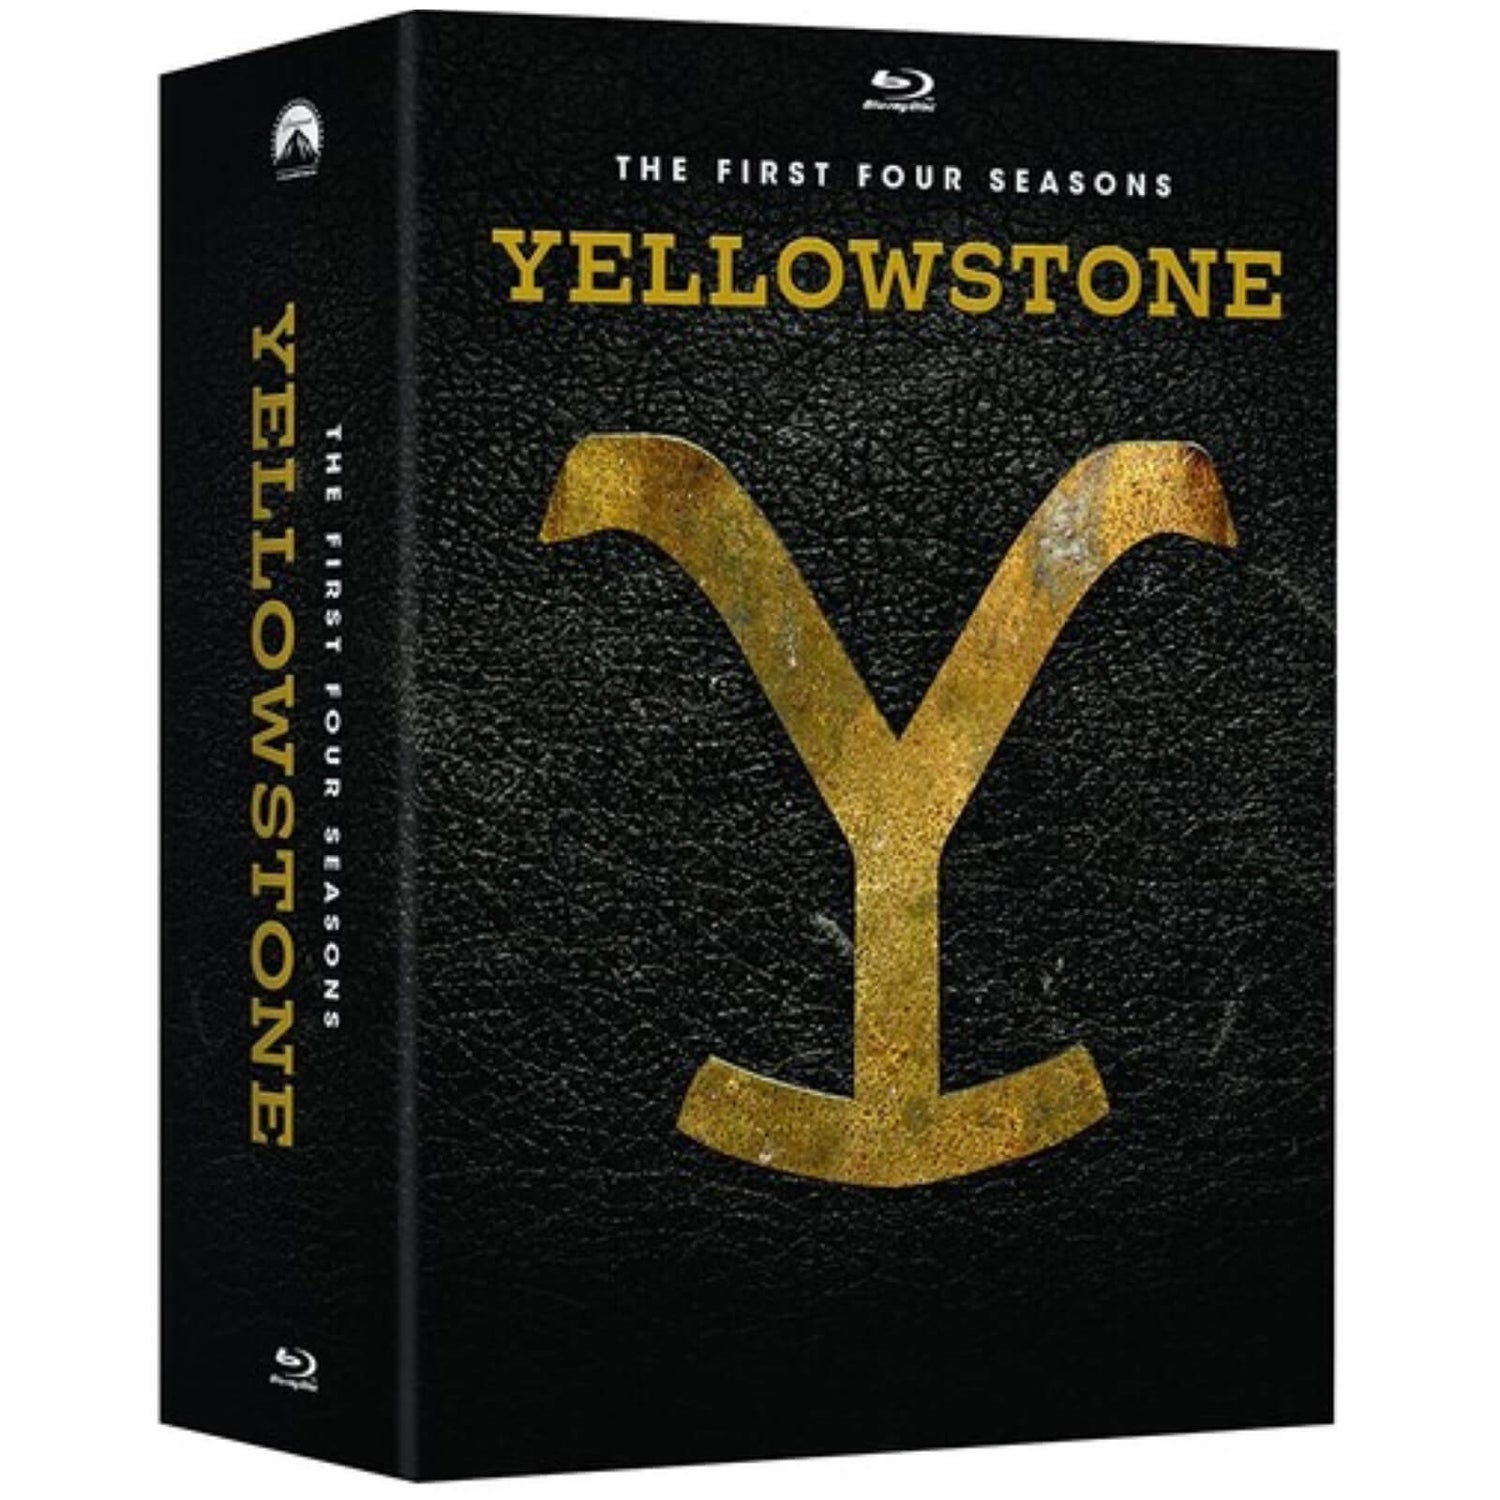 Yellowstone: The First Four Seasons (US Import)